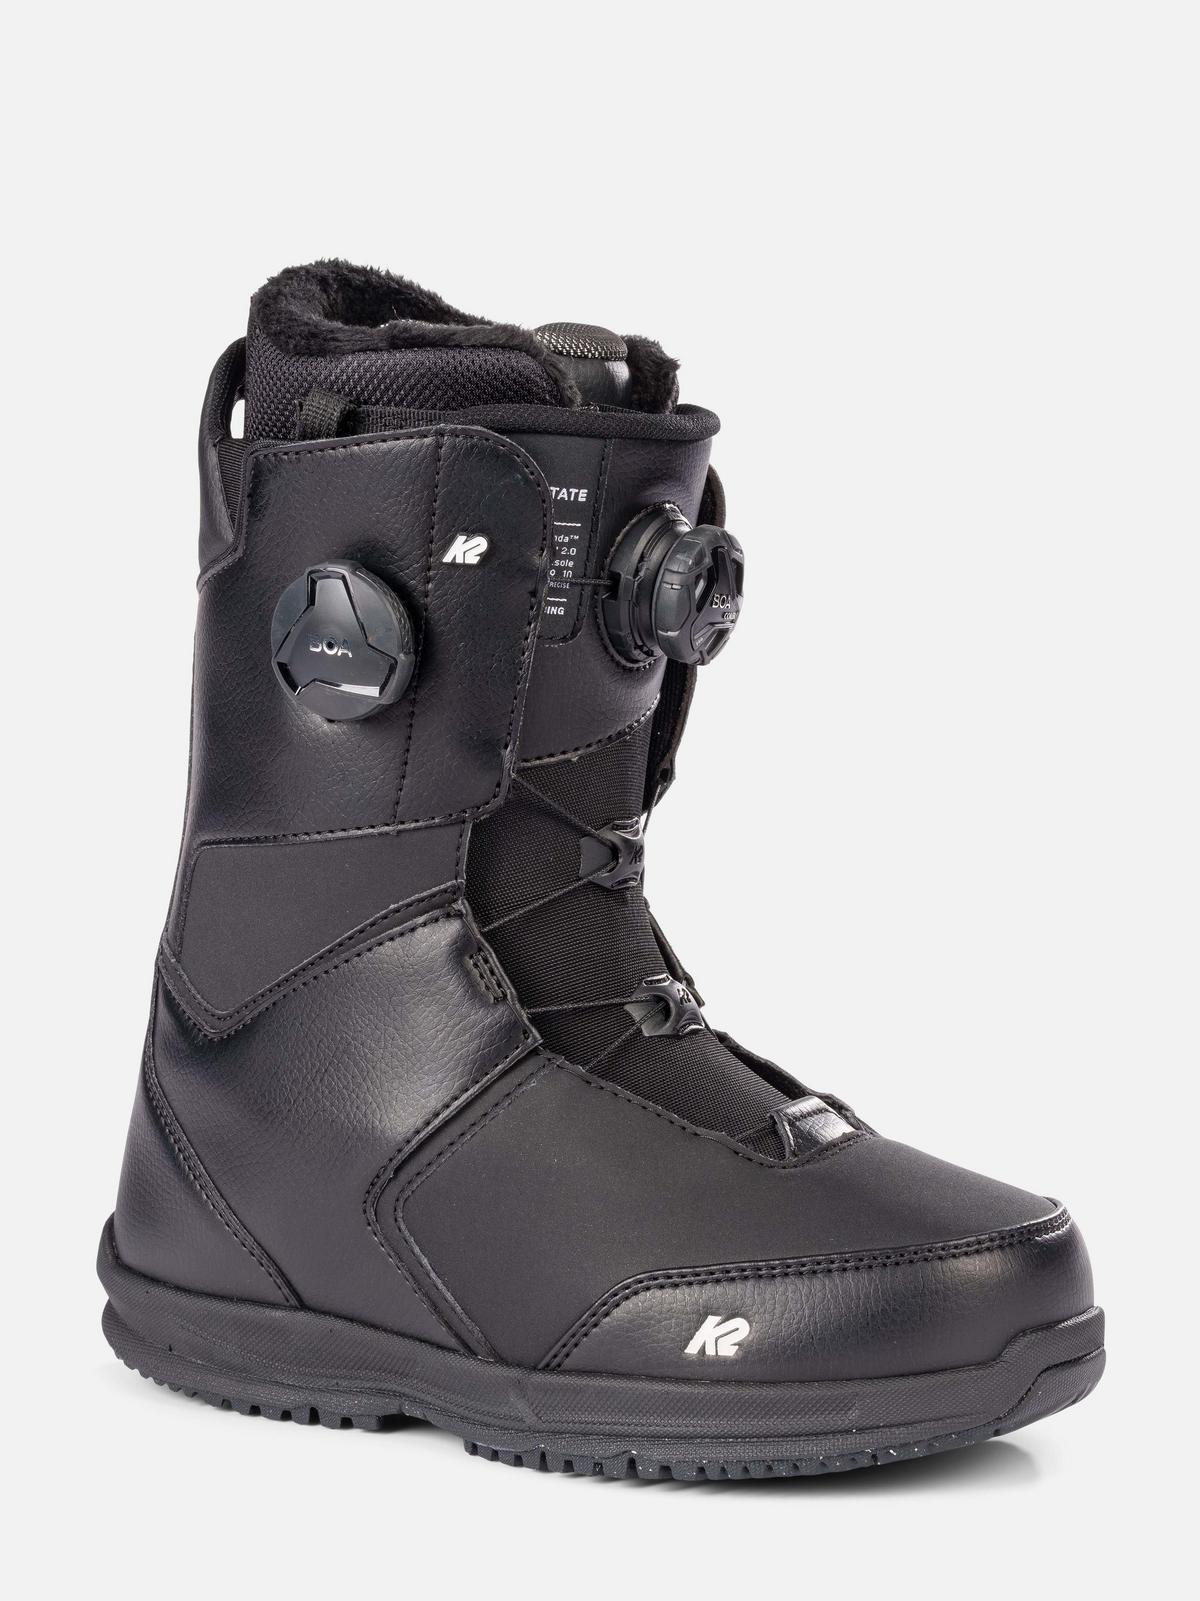 K2 Estate Women's Snowboard Boots 2023 | K2 Skis and K2 